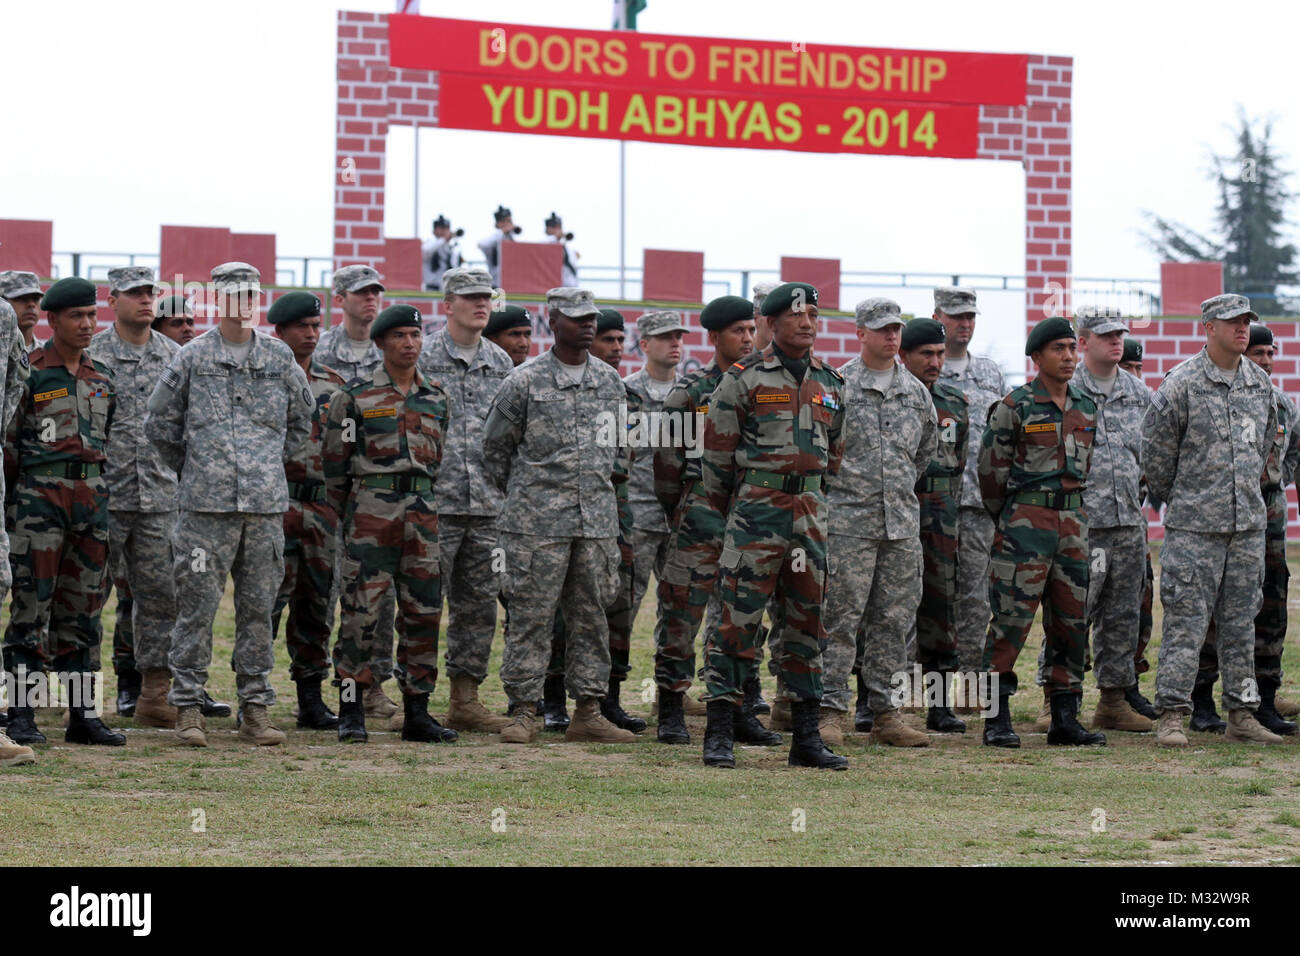 Soldiers from 1st Stryker Brigade Combat Team, 25th Infantry Division and the 2nd Battalion, 9th Ghurak Regiment of the Indian Army take part in the closing ceremonies for exercise Yudh Abhyas 14 at Chaubattia, India Sept. 30, 2014. More than 100 U.S. Soldiers participated in the exercise, which began Sept. 17 and too place at Ranikhet Cantonment, Utterakhand, India. Yudh Abhyas is an U.S. Army Pacific Command sponsored exercise and is geared toward enhancing cooperation and coordination through training and cultural exchanges and building skills and relationships necessary during a peacekeepi Stock Photo